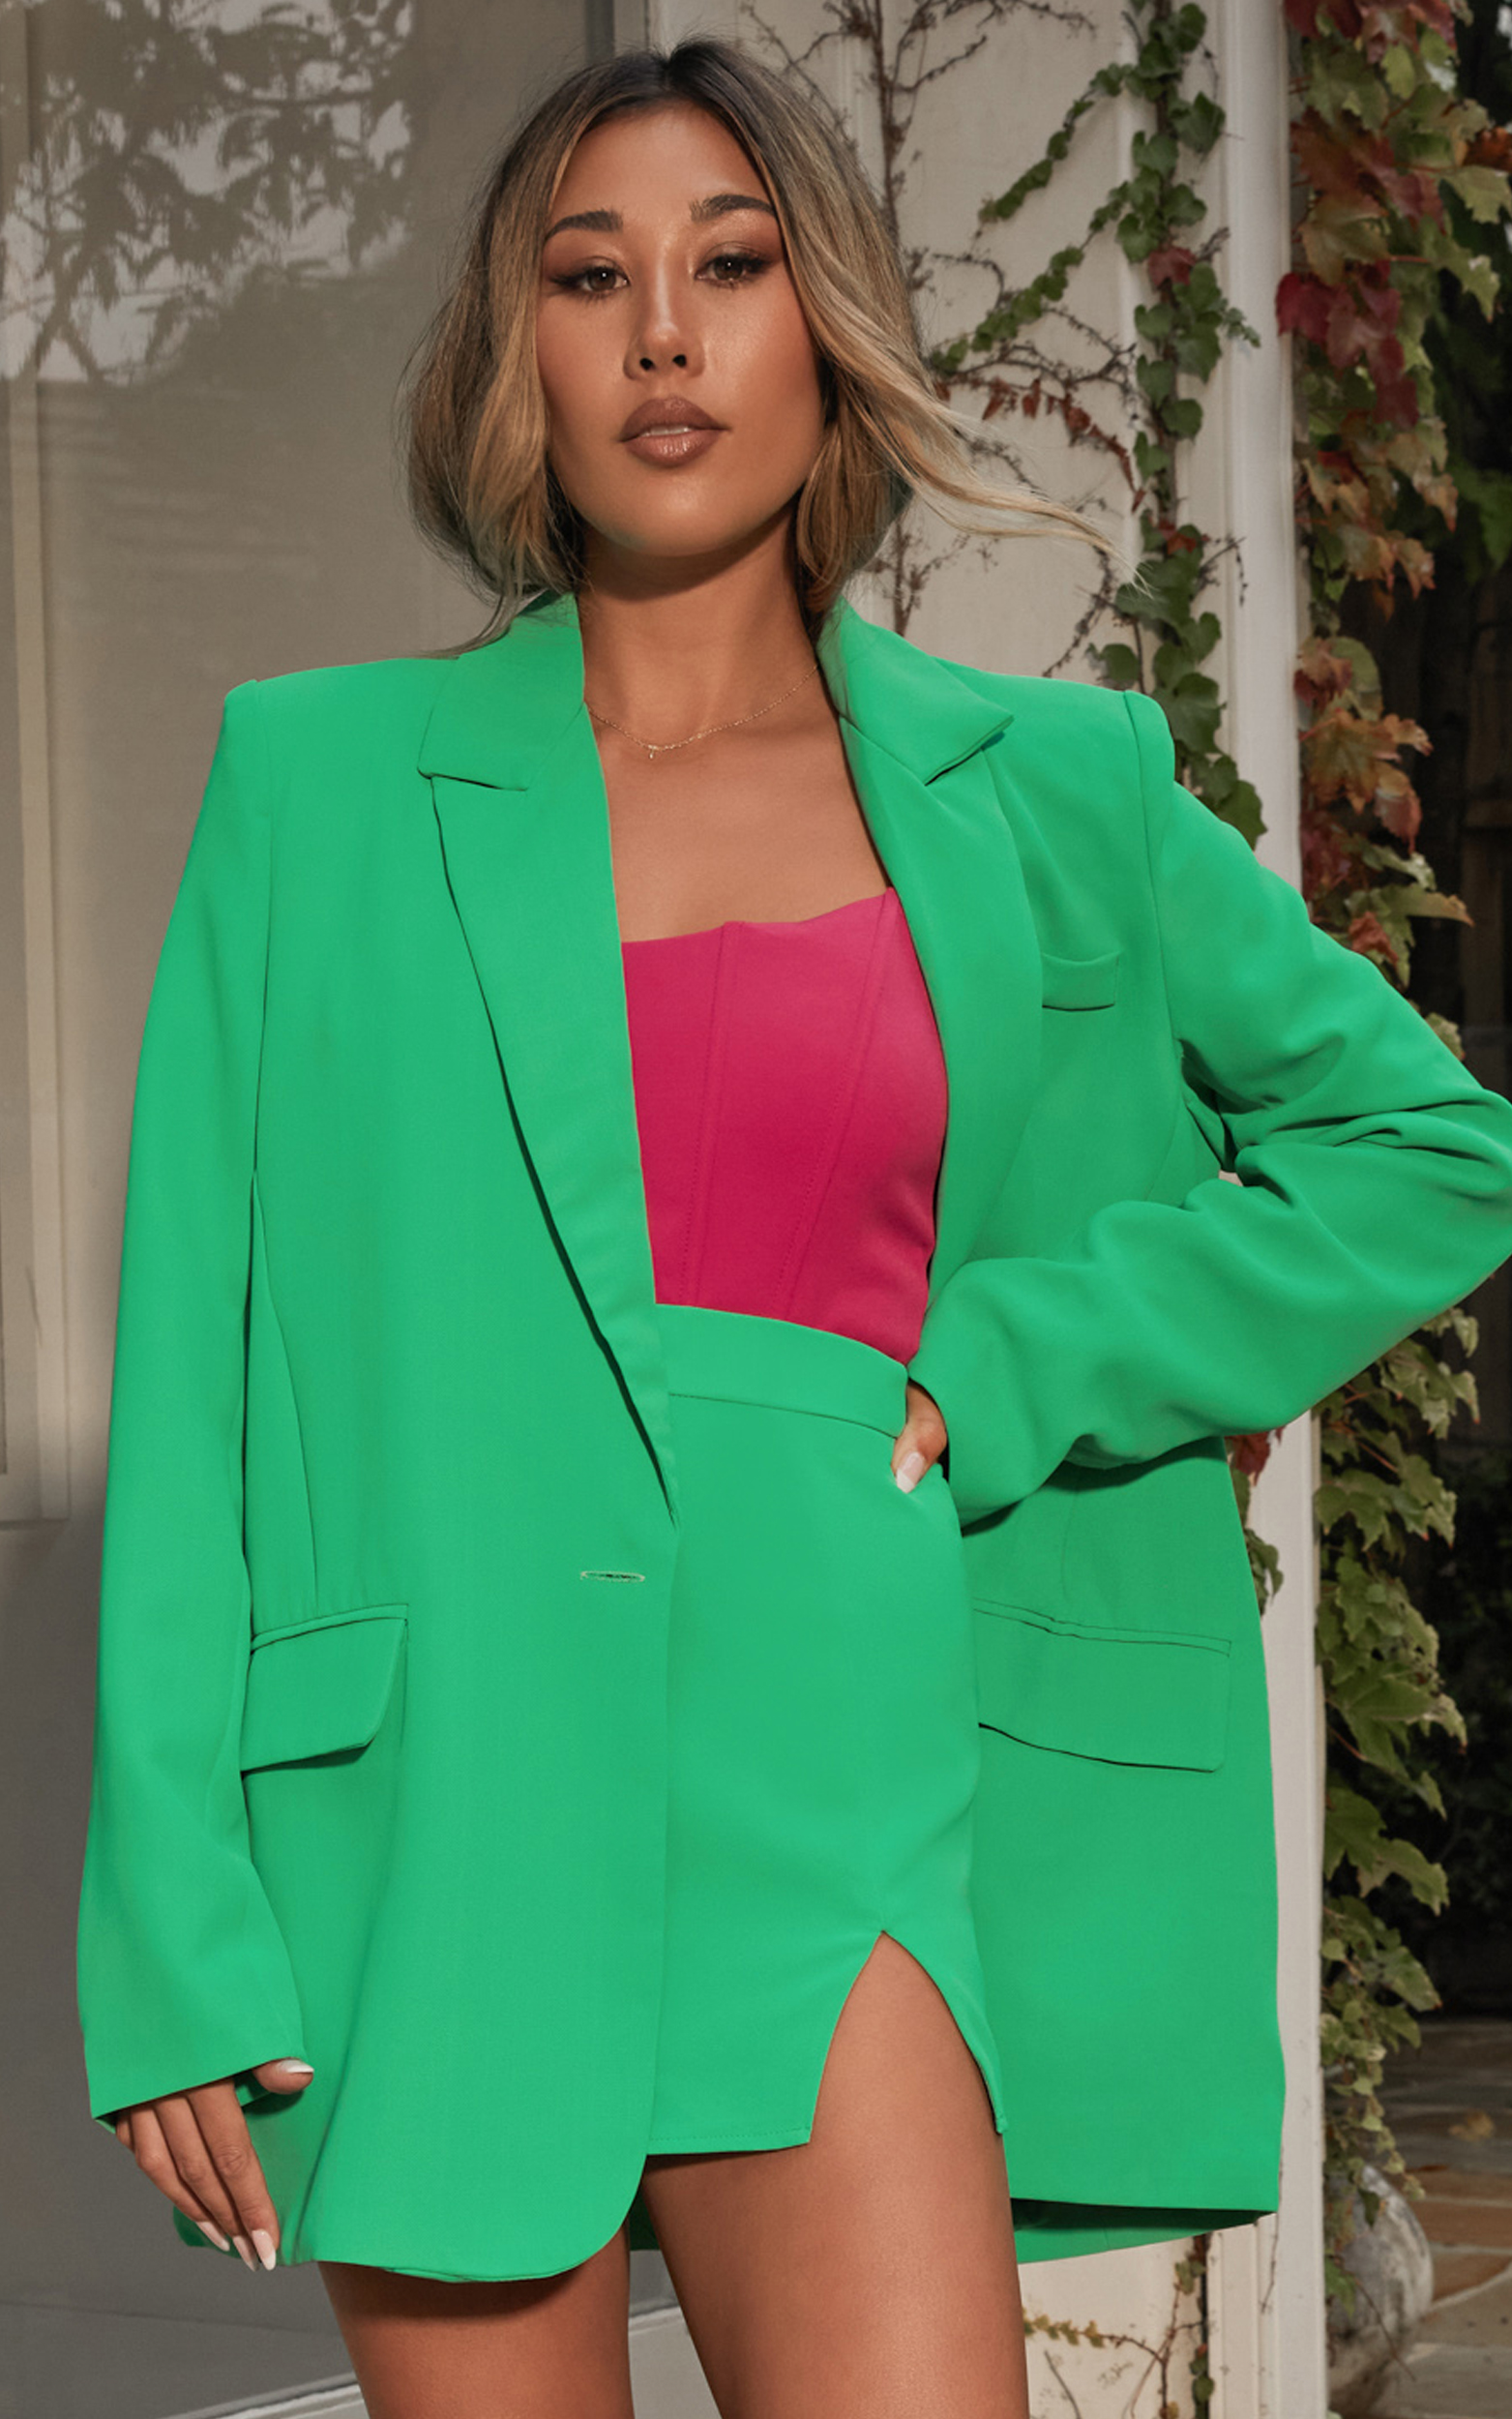 Michelle Oversized Plunge Neck Button Up Blazer in Green - 06, GRN2, hi-res image number null